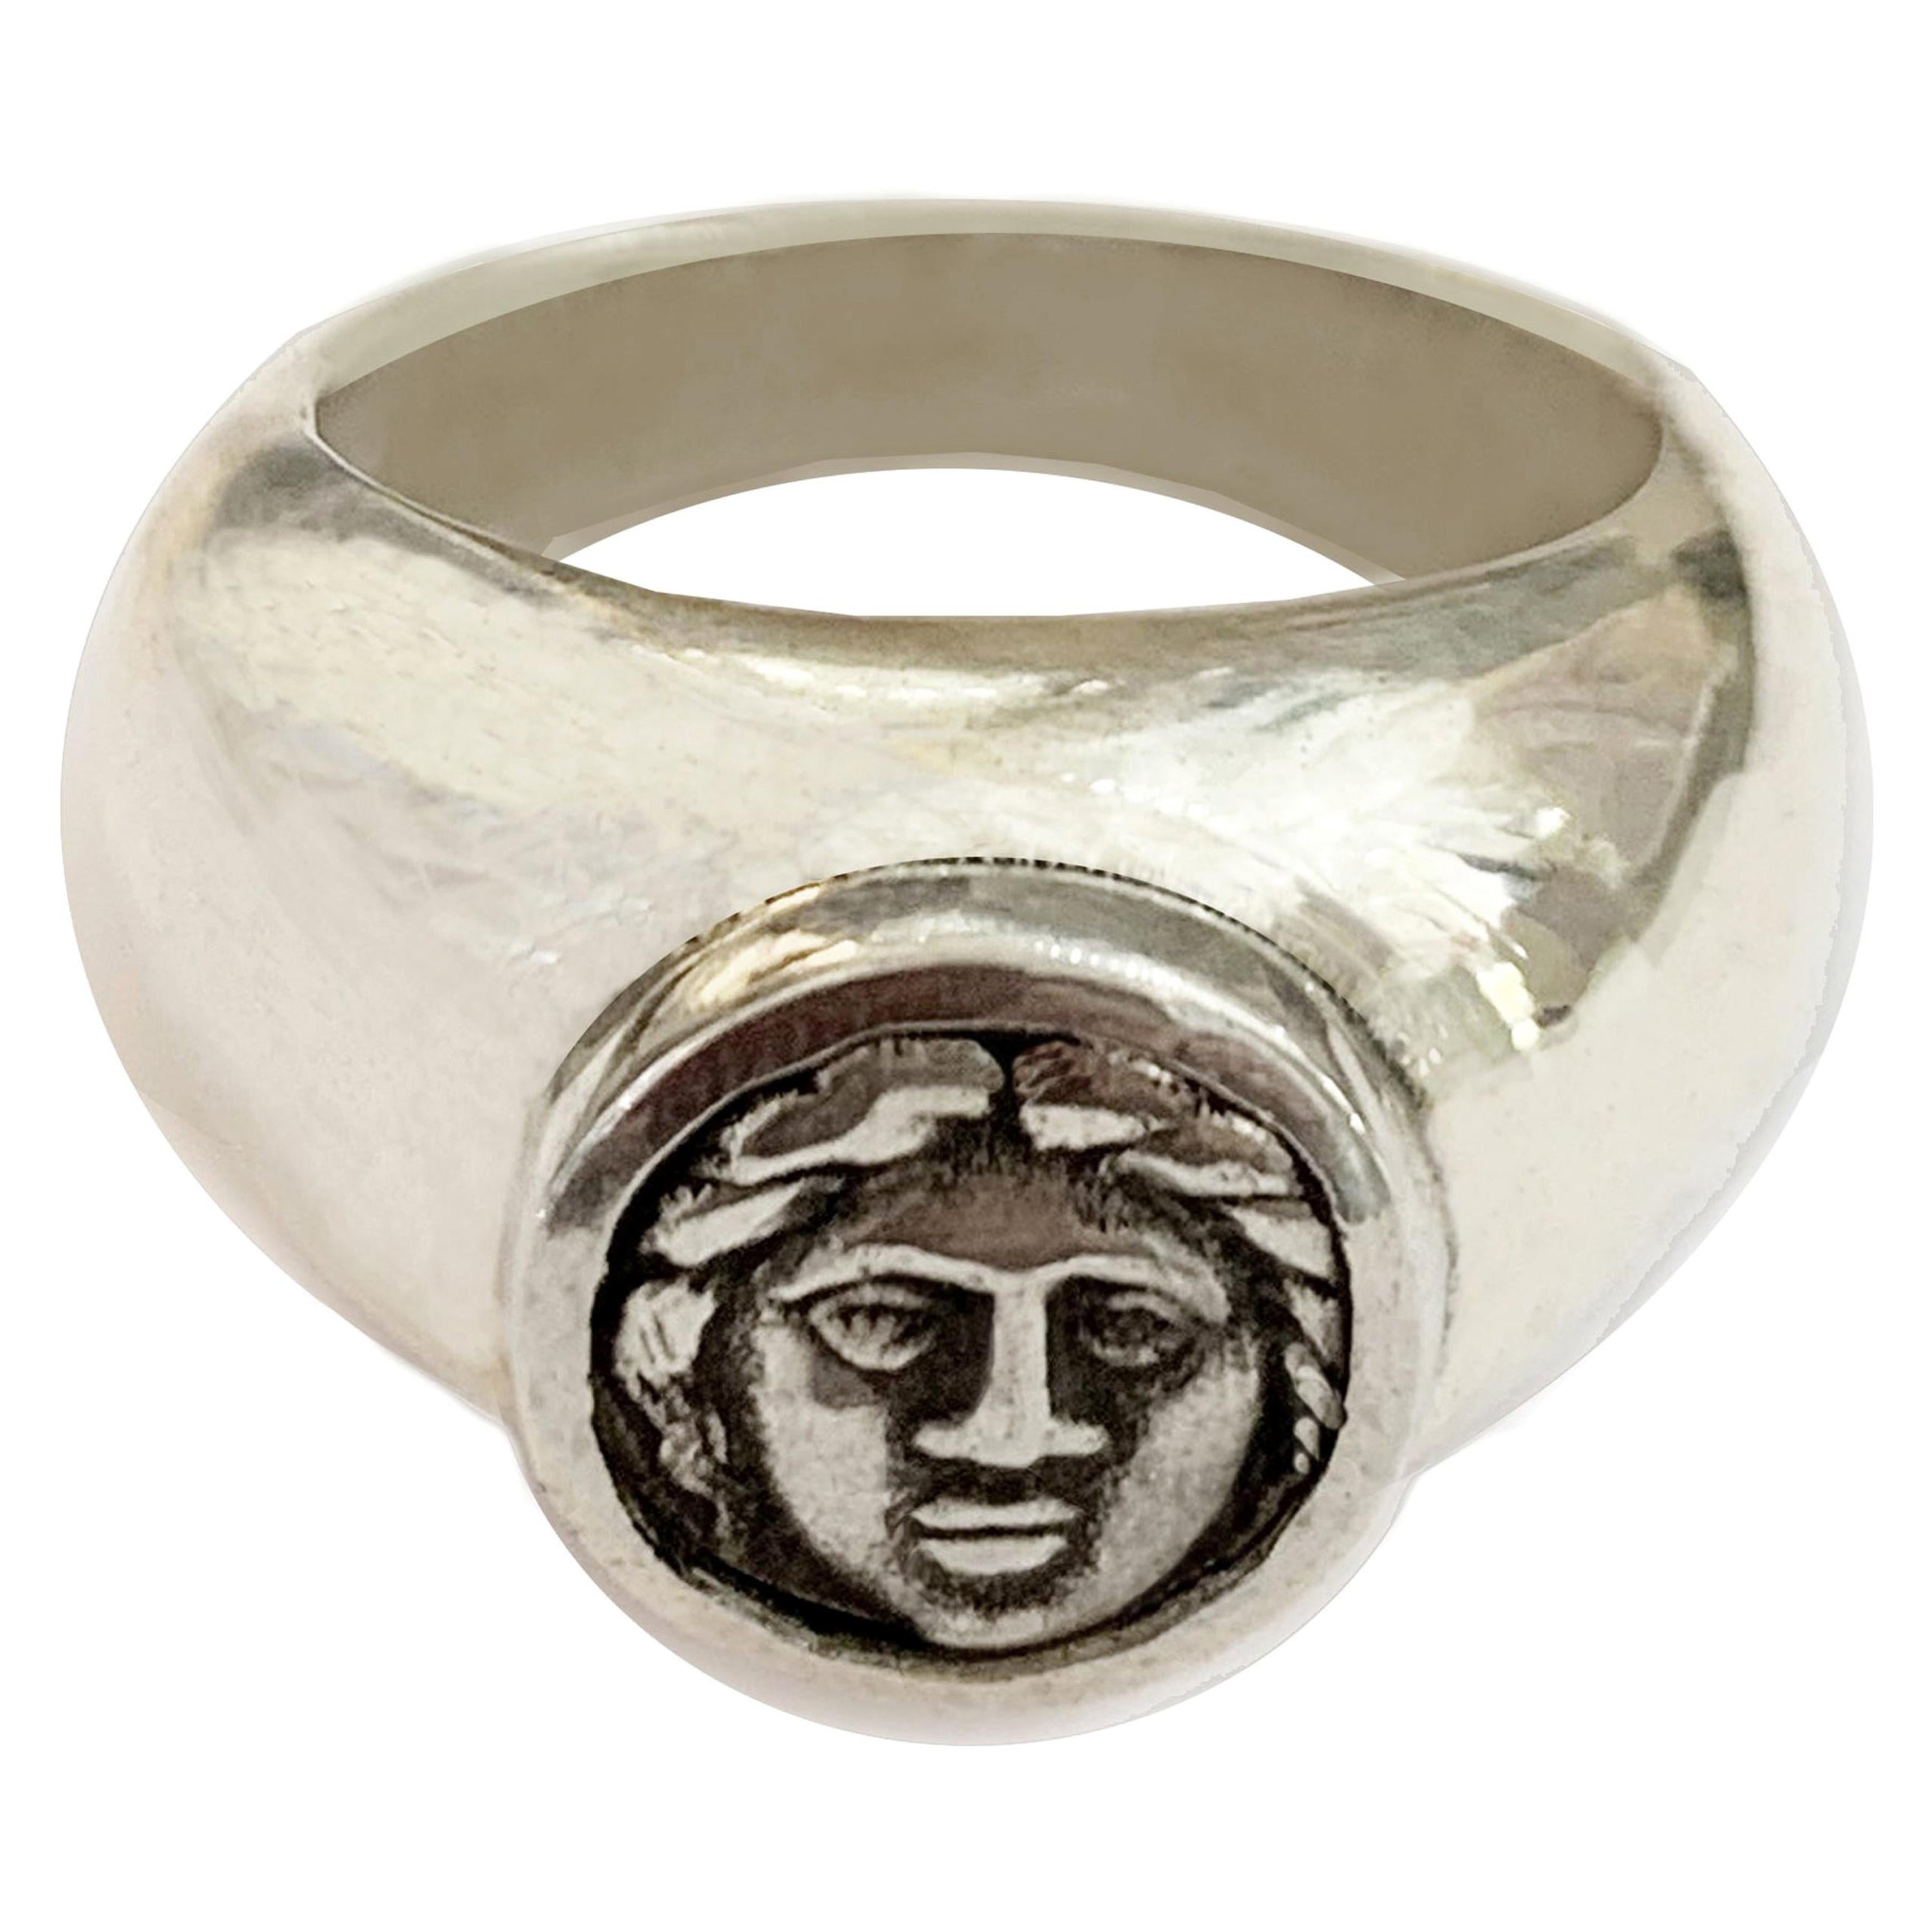 Greek Coin Authentic 5th Cent. B.C. Sterling Silver Ring Depicting God Apollo